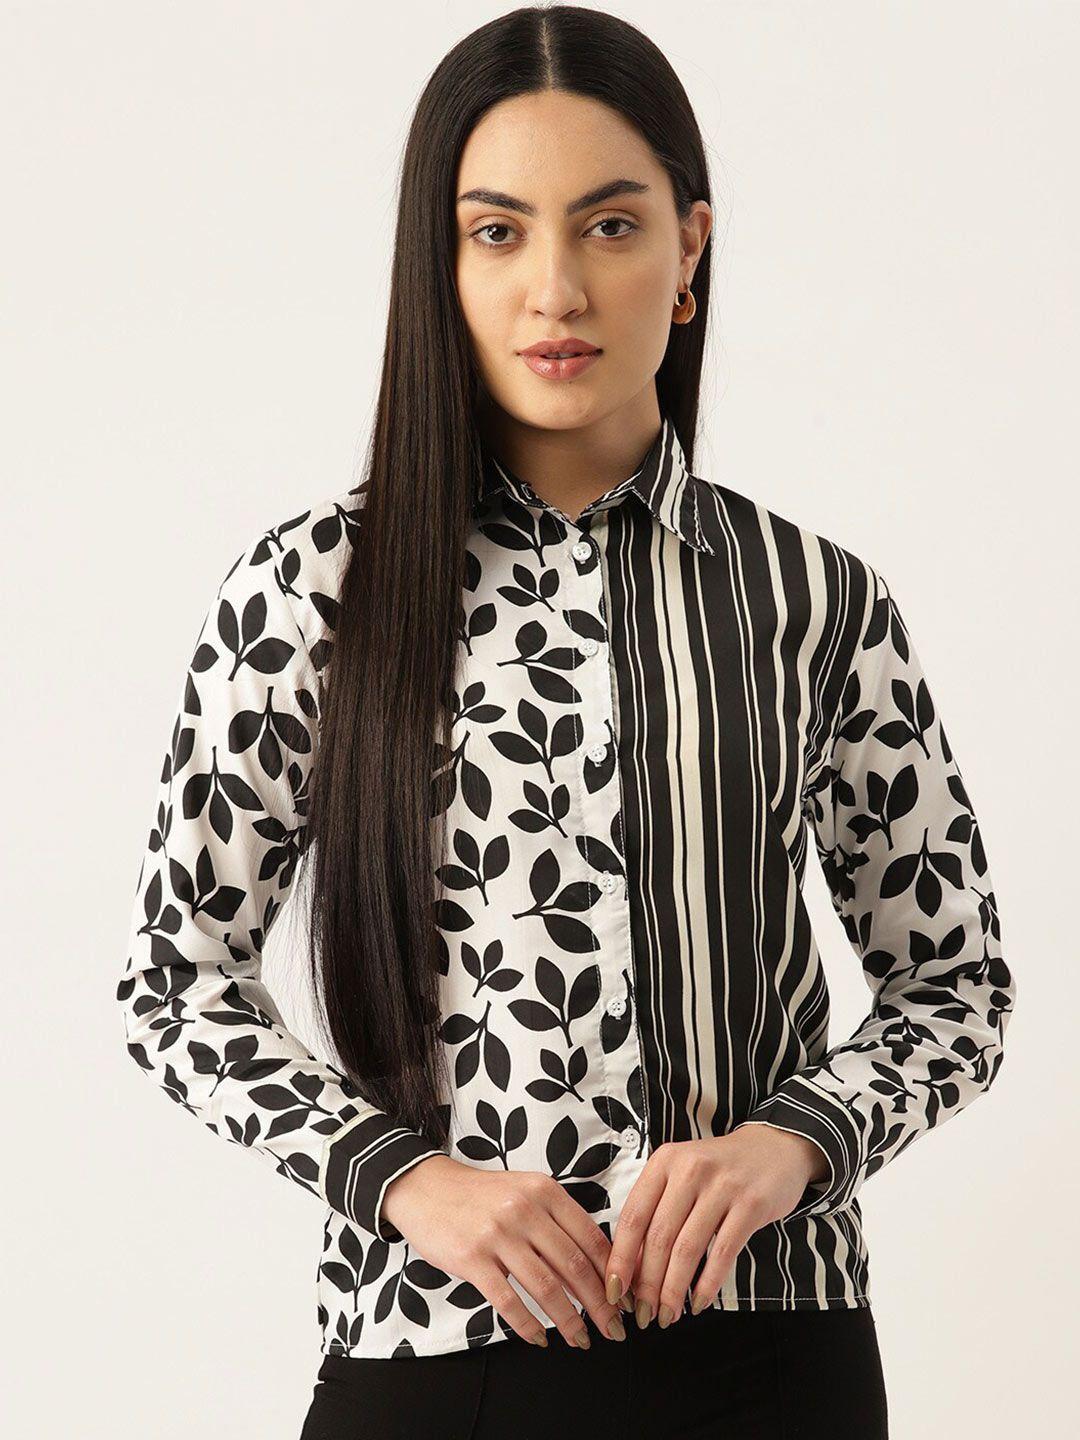 BAESD Floral Printed Shirt Style Top